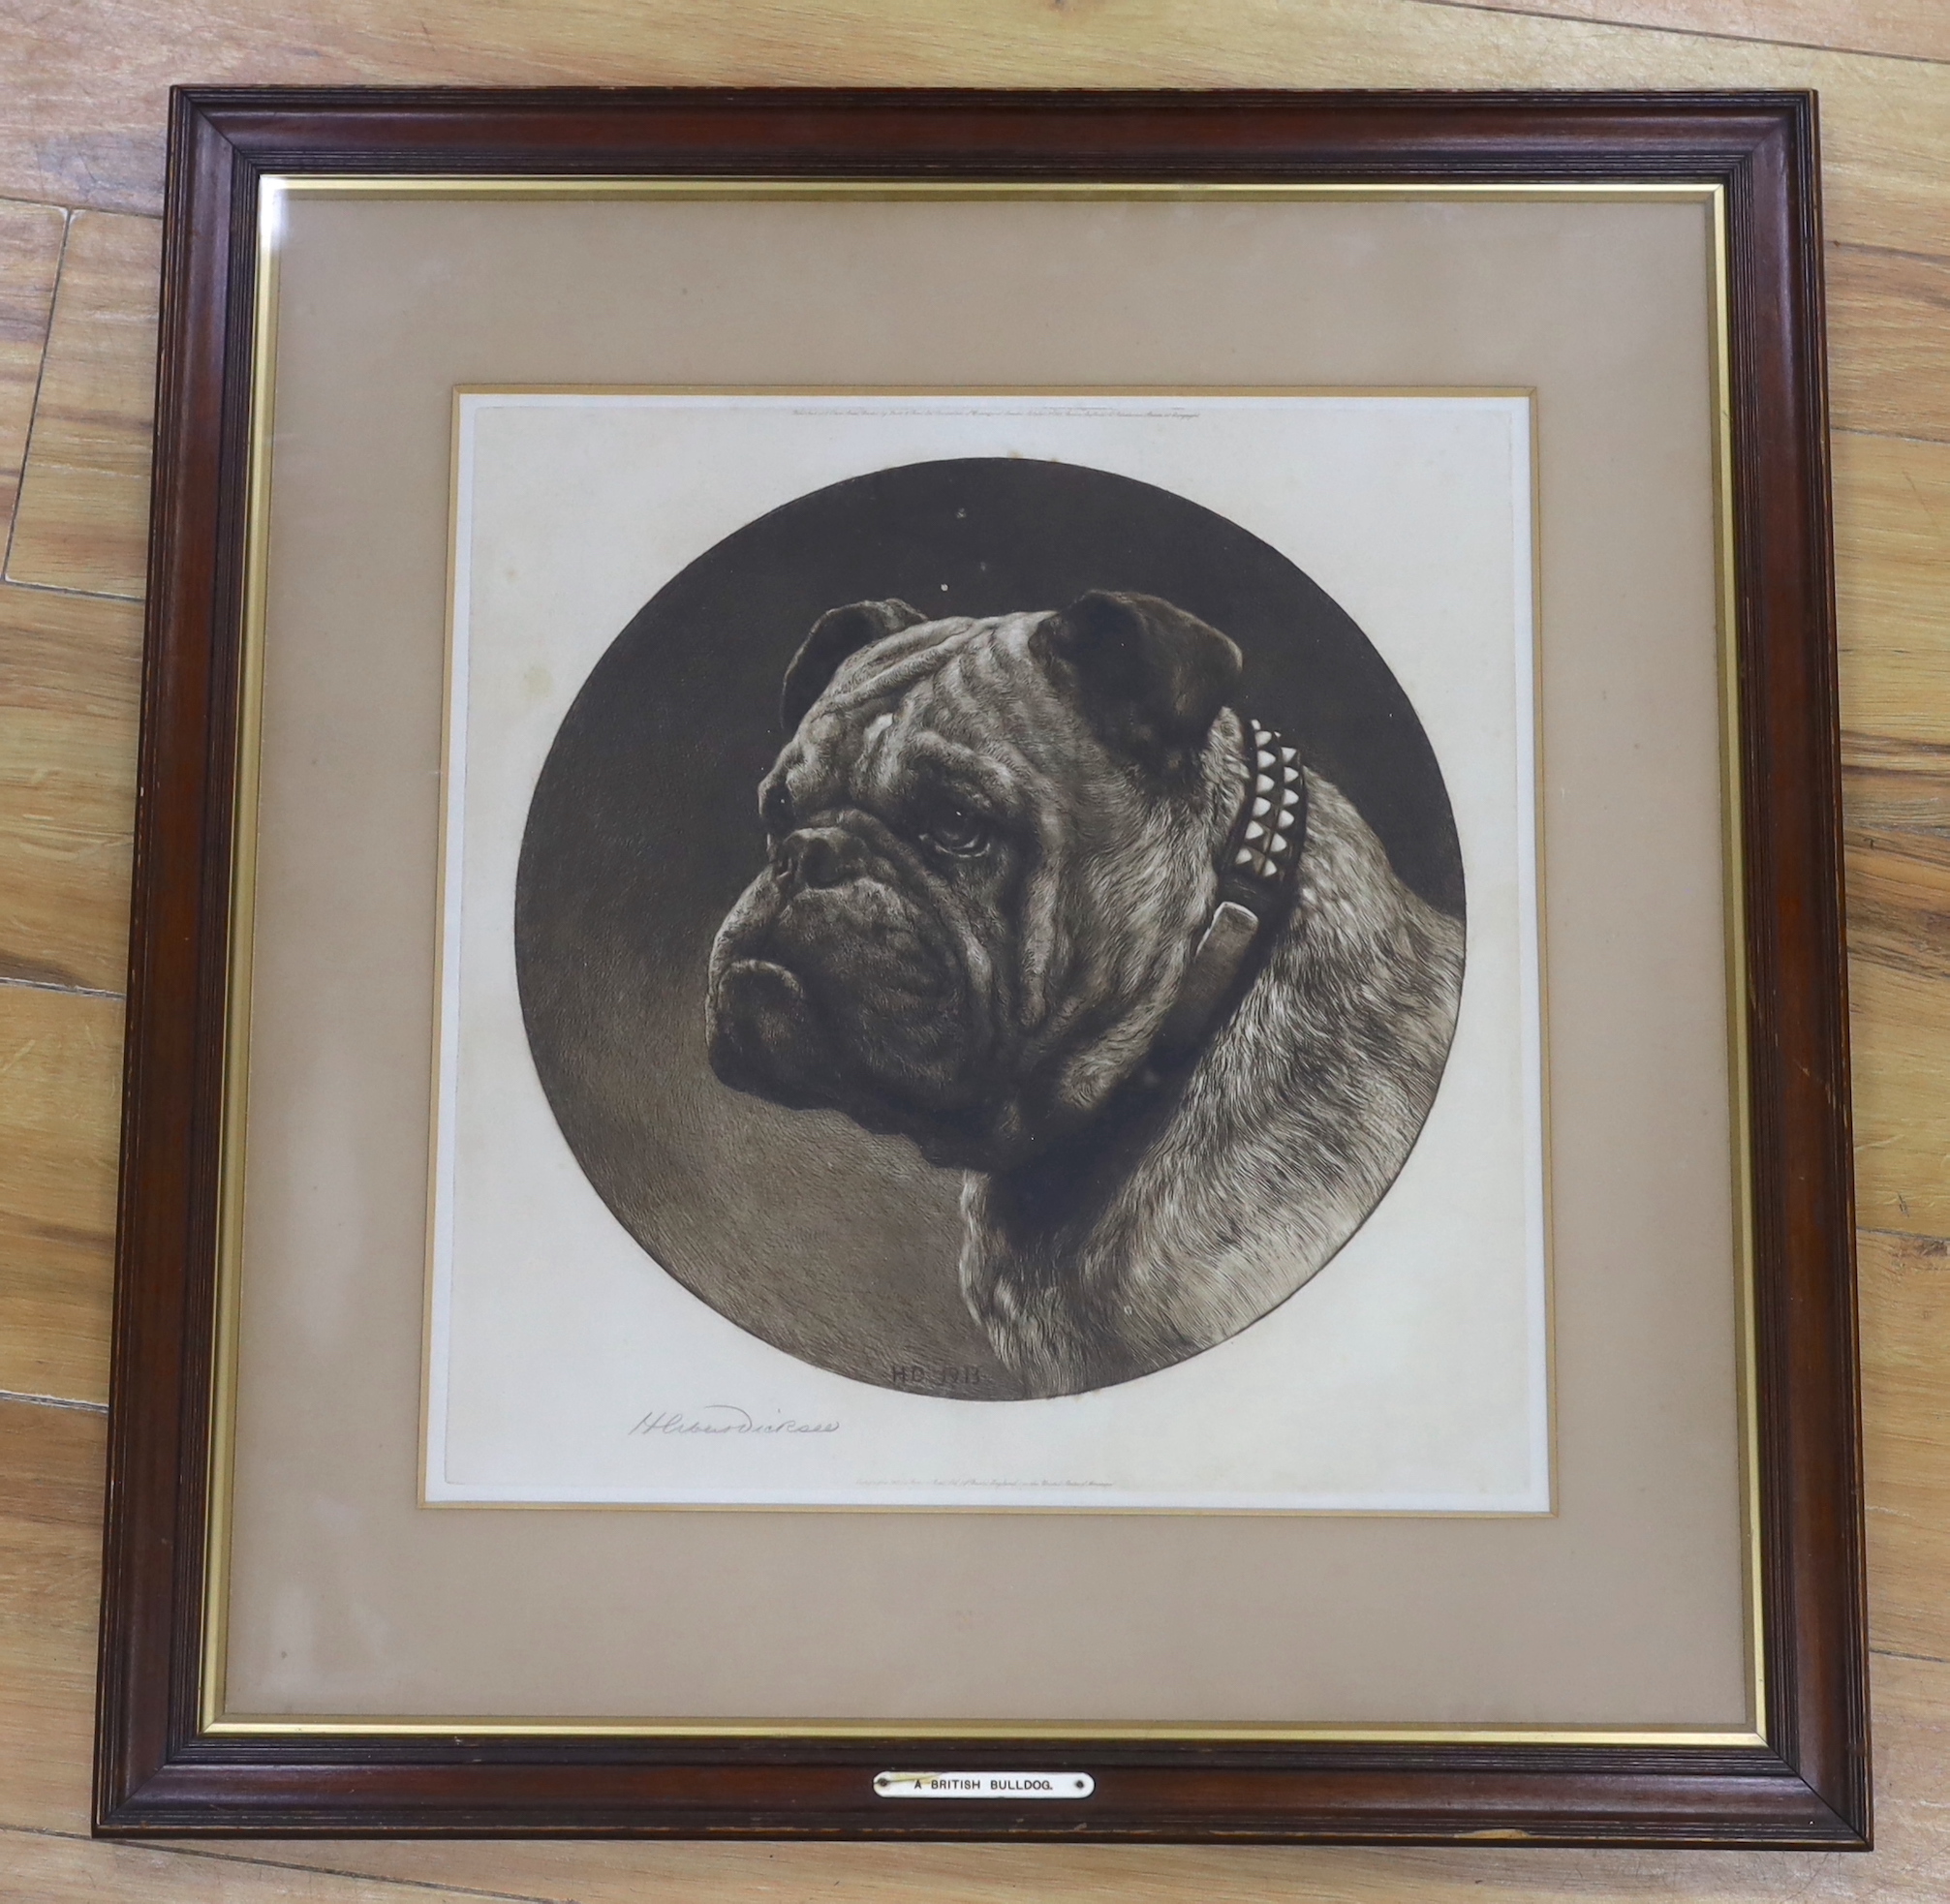 Herbert Dicksee (1862-1942), etching, A British Bull Dog, signed in pencil, publ. 1913, 43 x 42cm